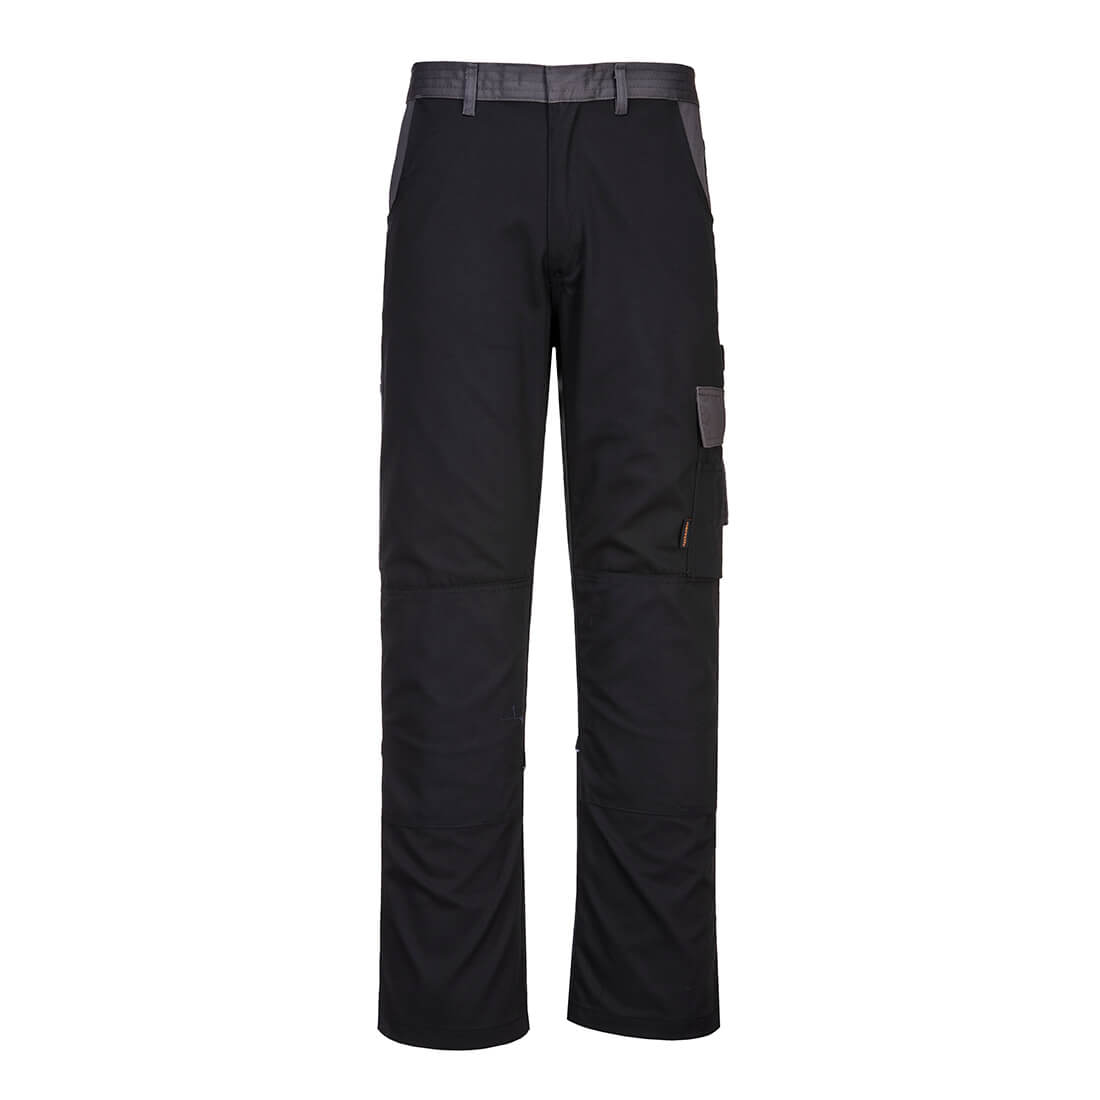 Portwest PW2 Heavy Weight Service Trousers